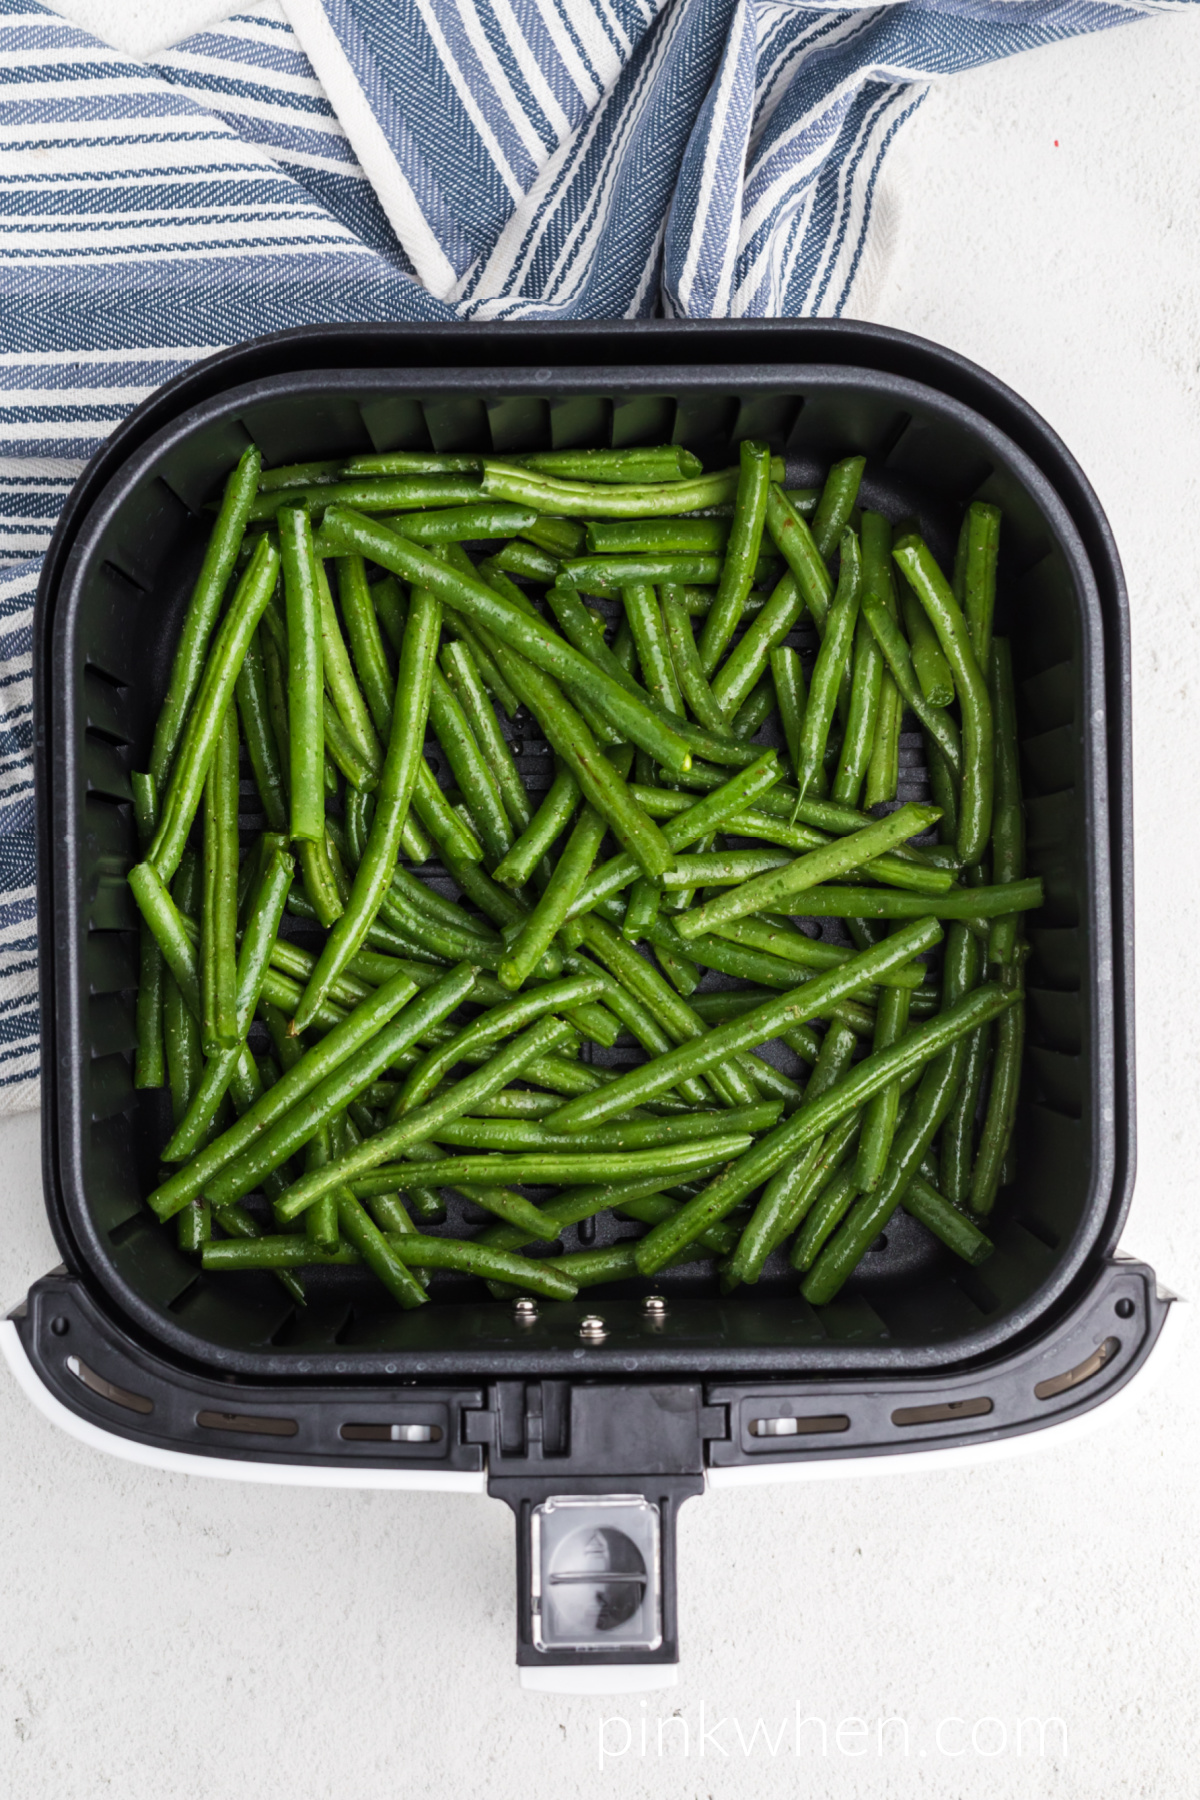 fresh green beans in air fryer basket ready to cook. 